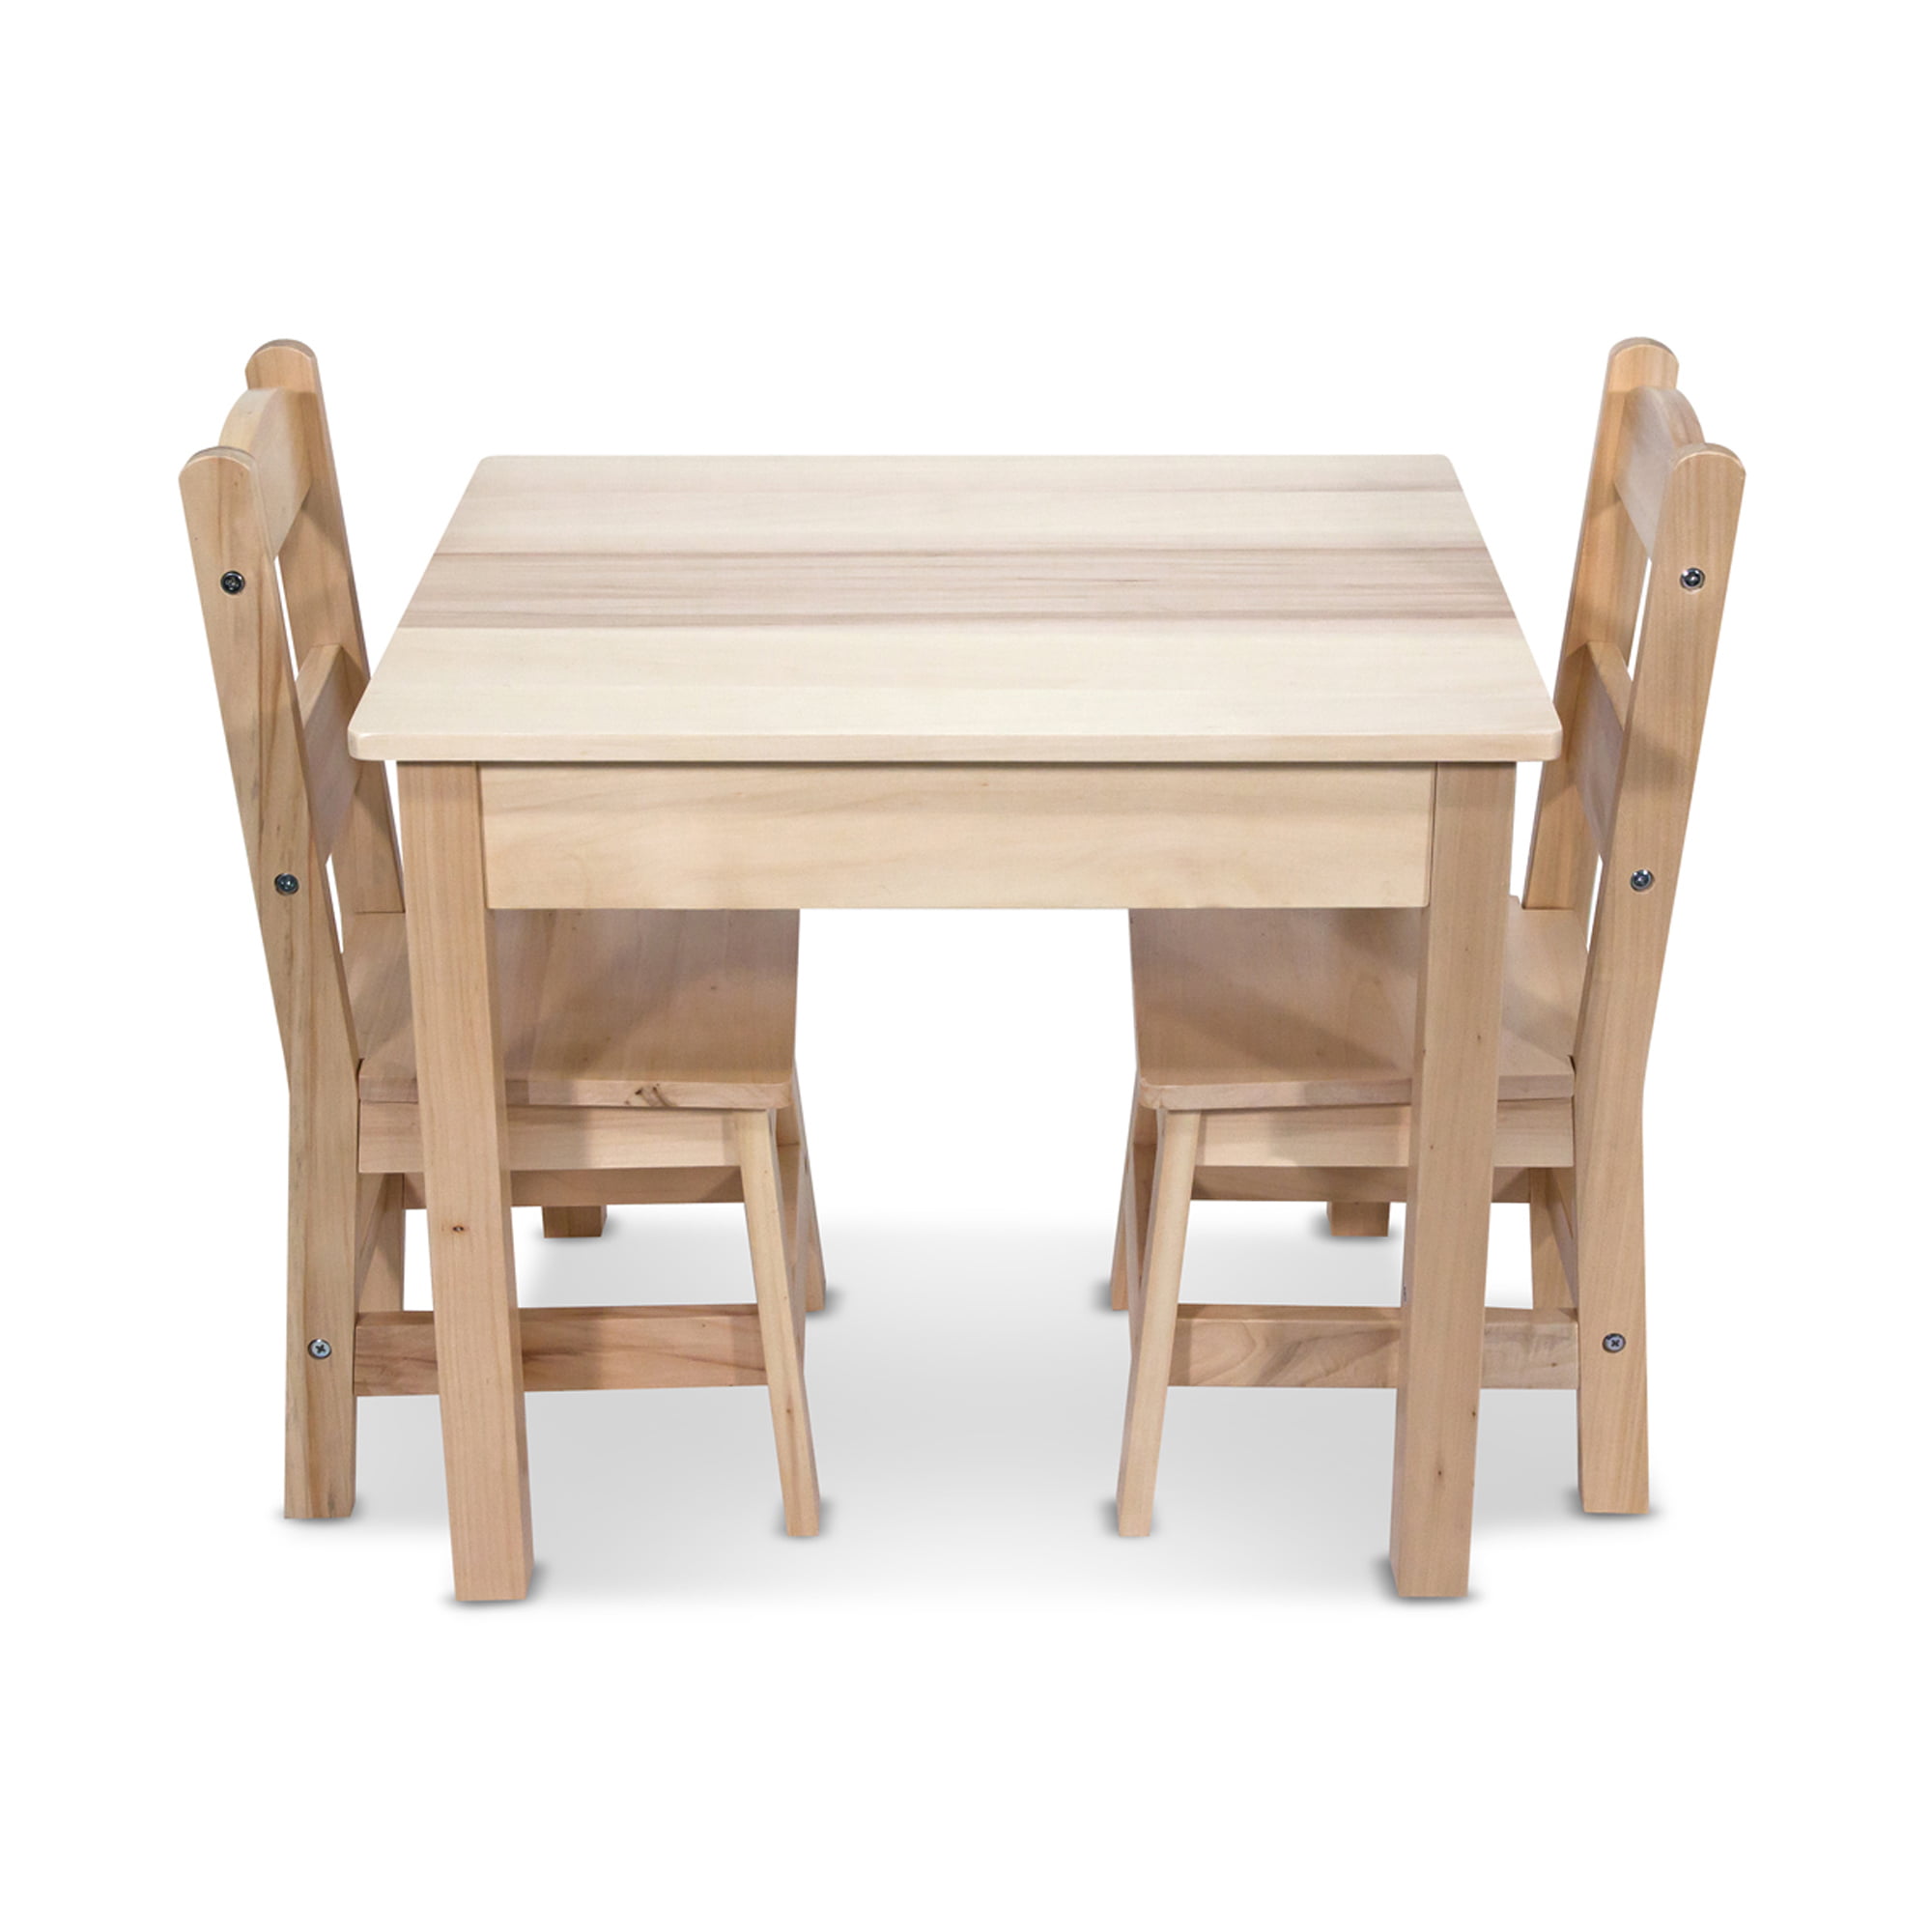 Melissa & Doug Solid Wood Table & Chairs (Kids Furniture, Sturdy Wooden